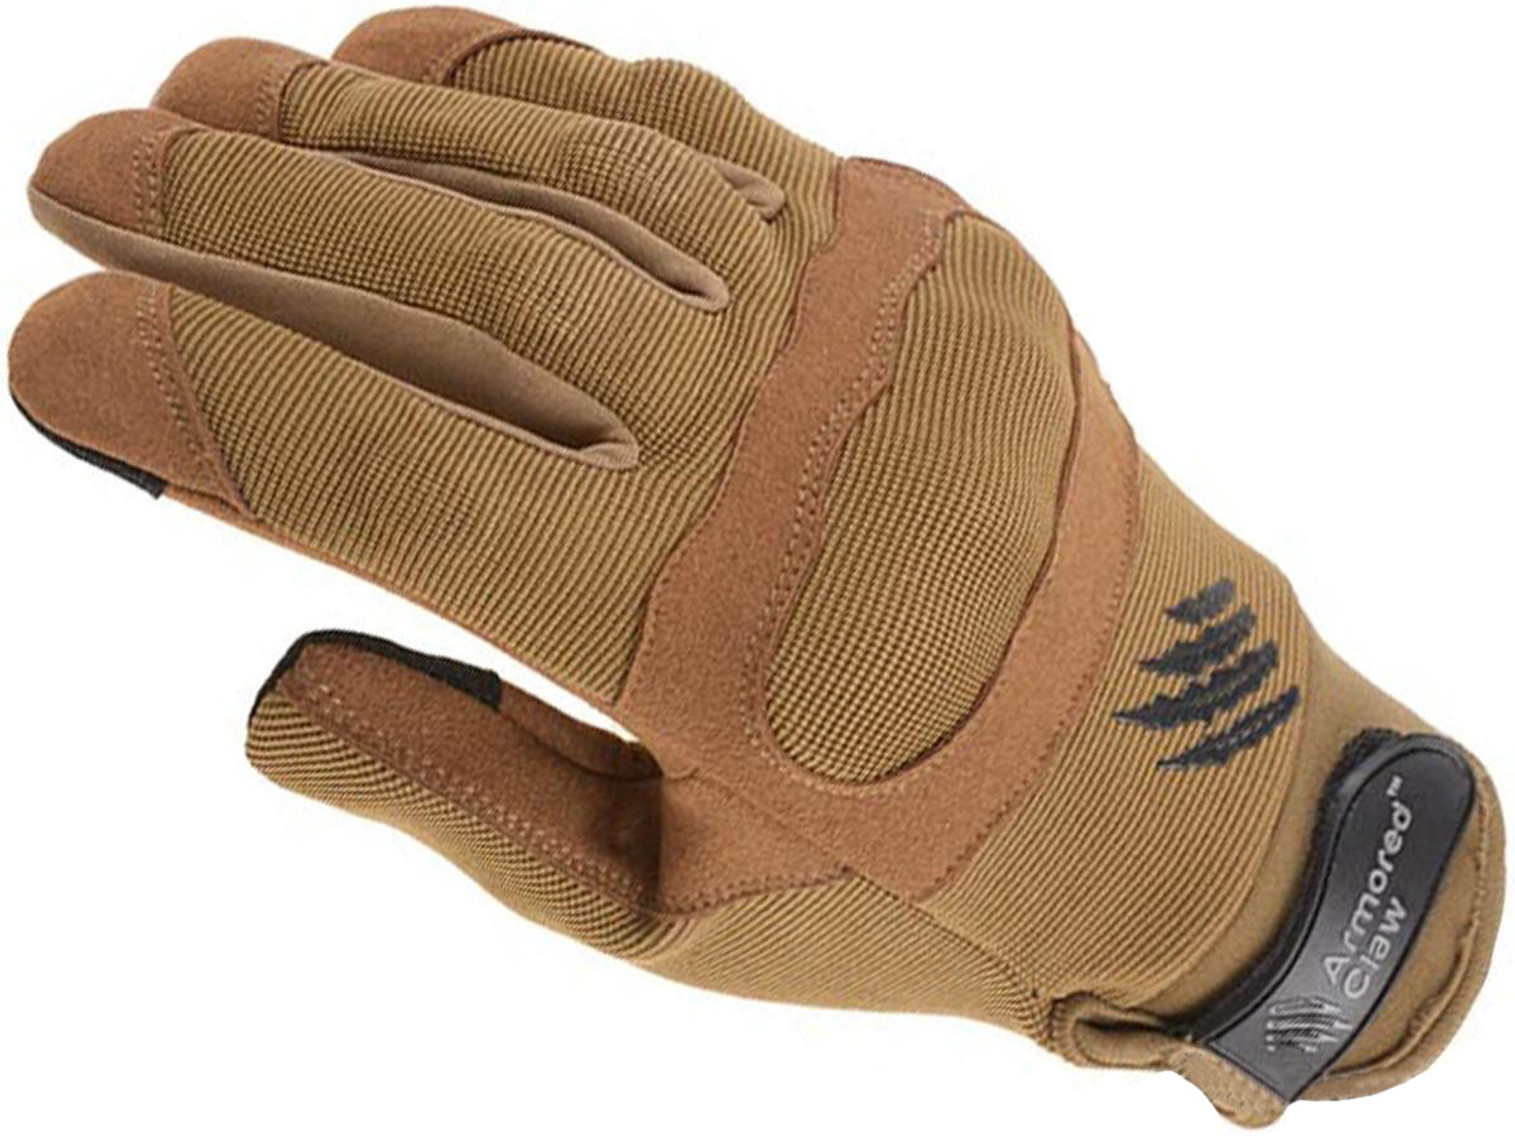 Armored Claw "Shield Flex" Tactical Glove (Color: Tan / Large)